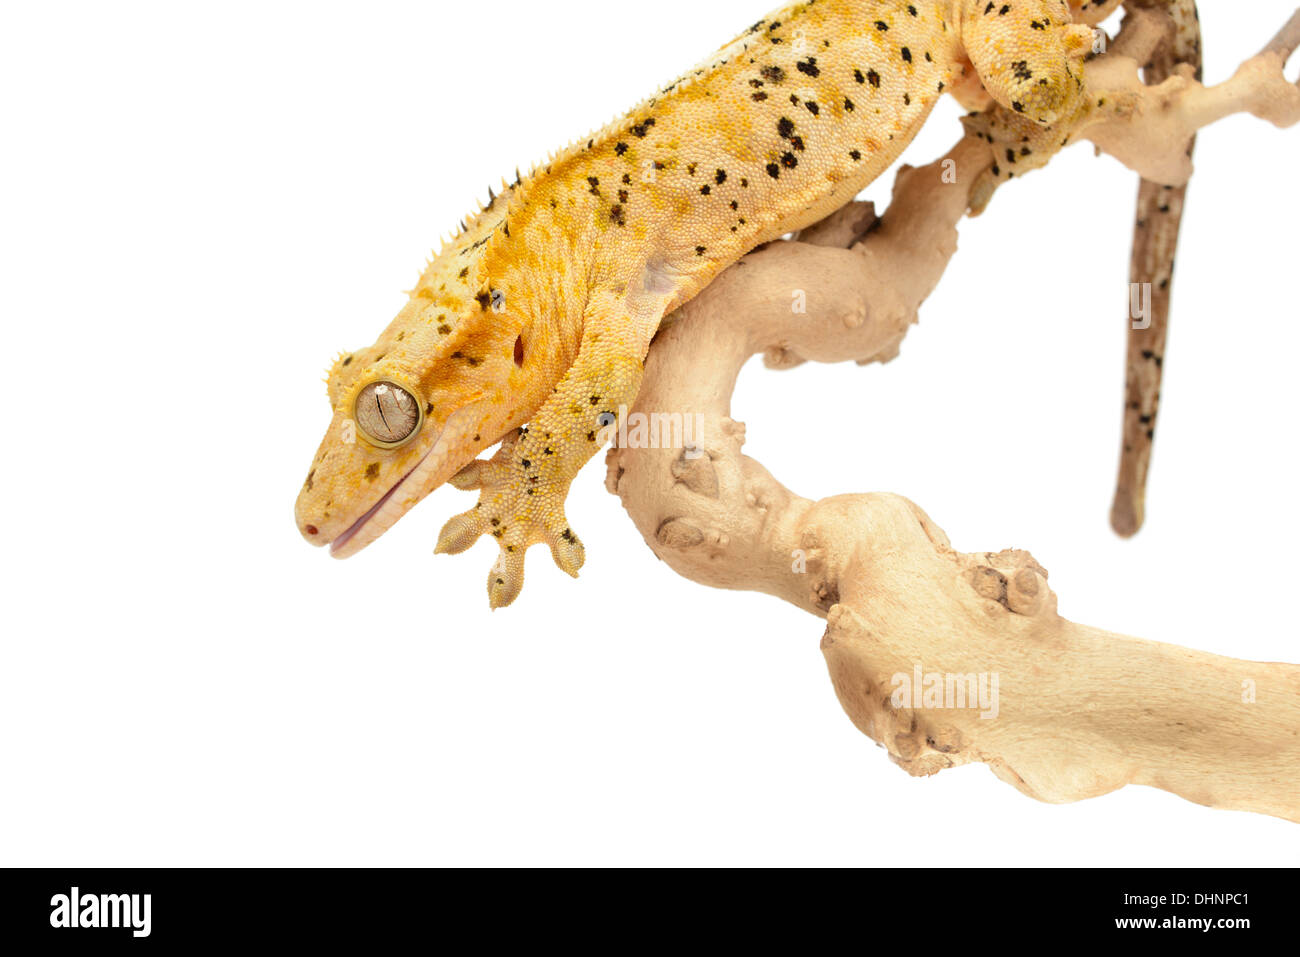 Crested gecko on white background. Stock Photo